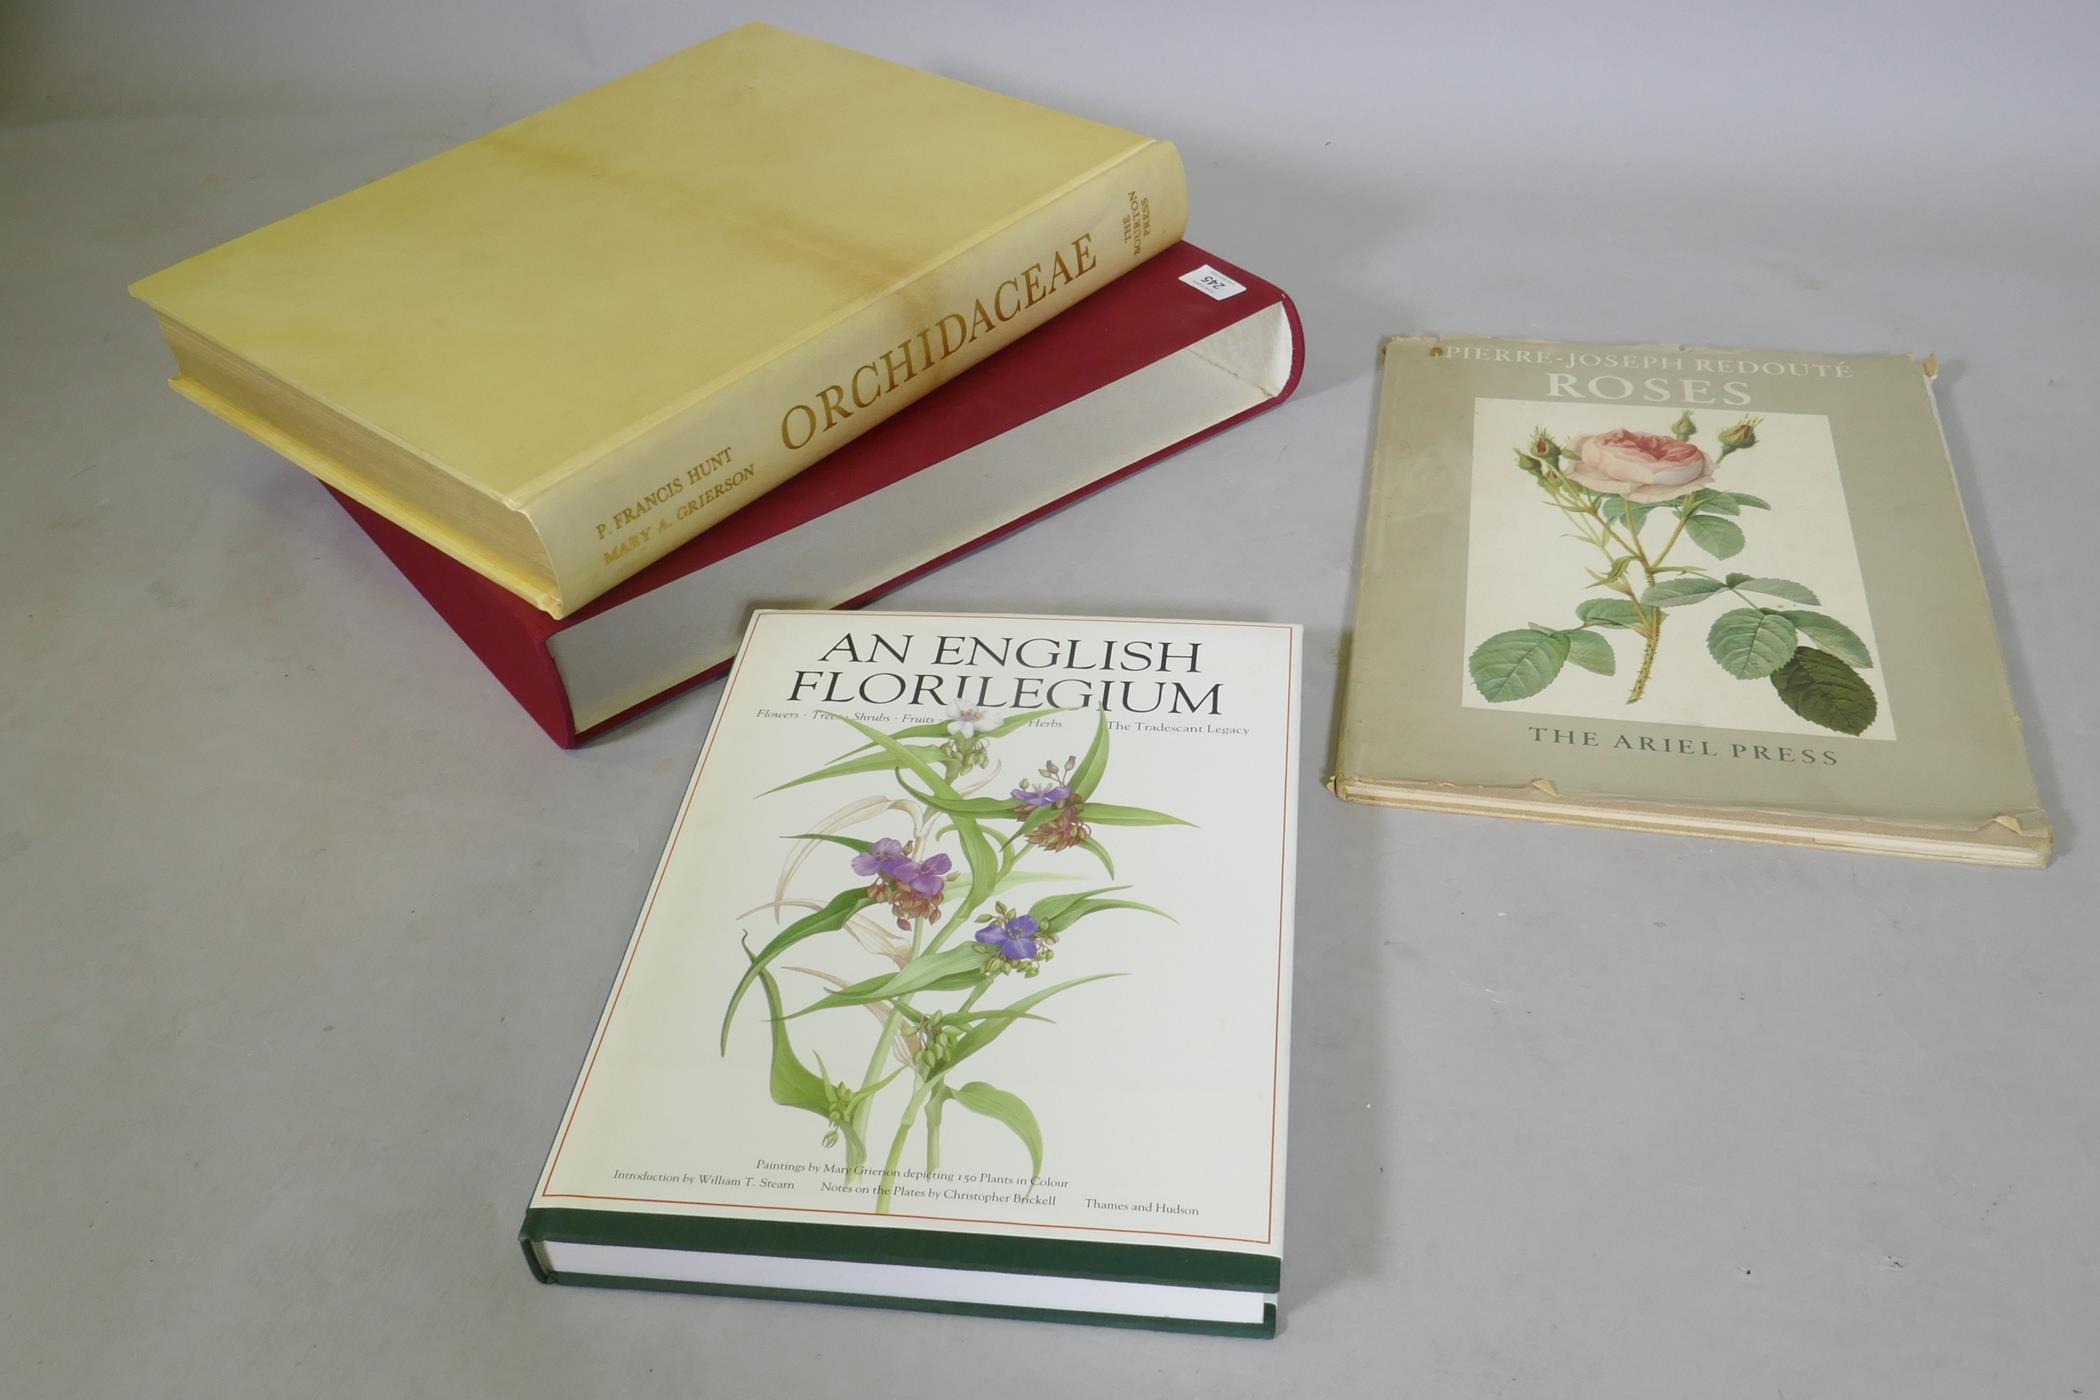 Orchidaceae, P. Francis Hunt & Mary A. Grierson, limited edition No 468/600, signed by the author